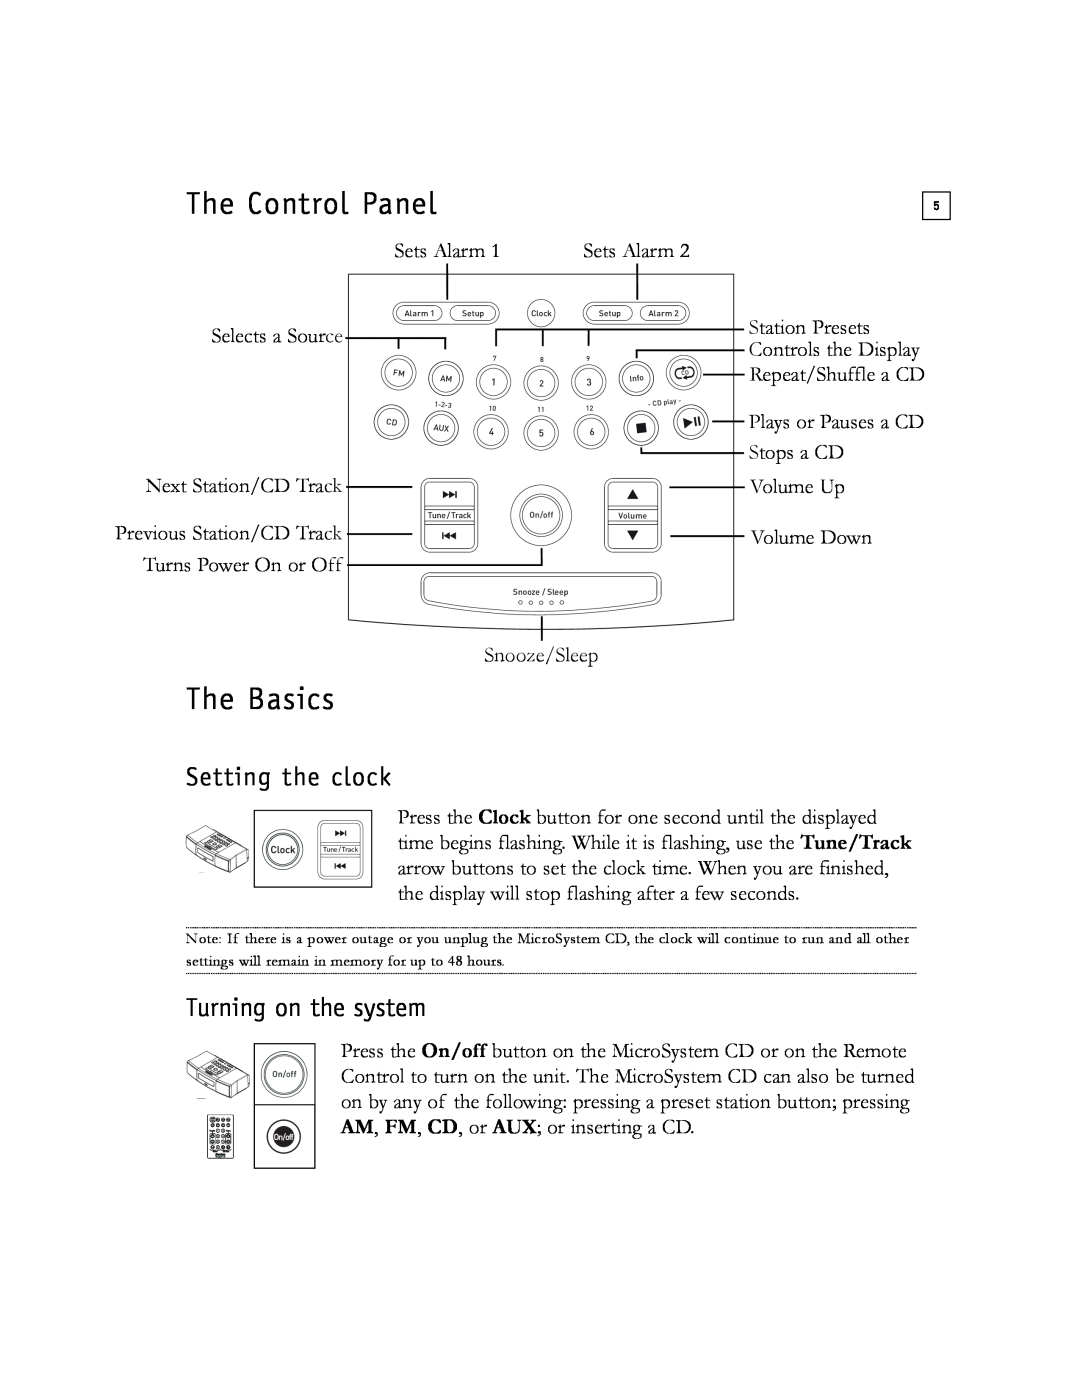 Boston Acoustics Shelf Stereo System owner manual The Control Panel, The Basics, Setting the clock, Turning on the system 